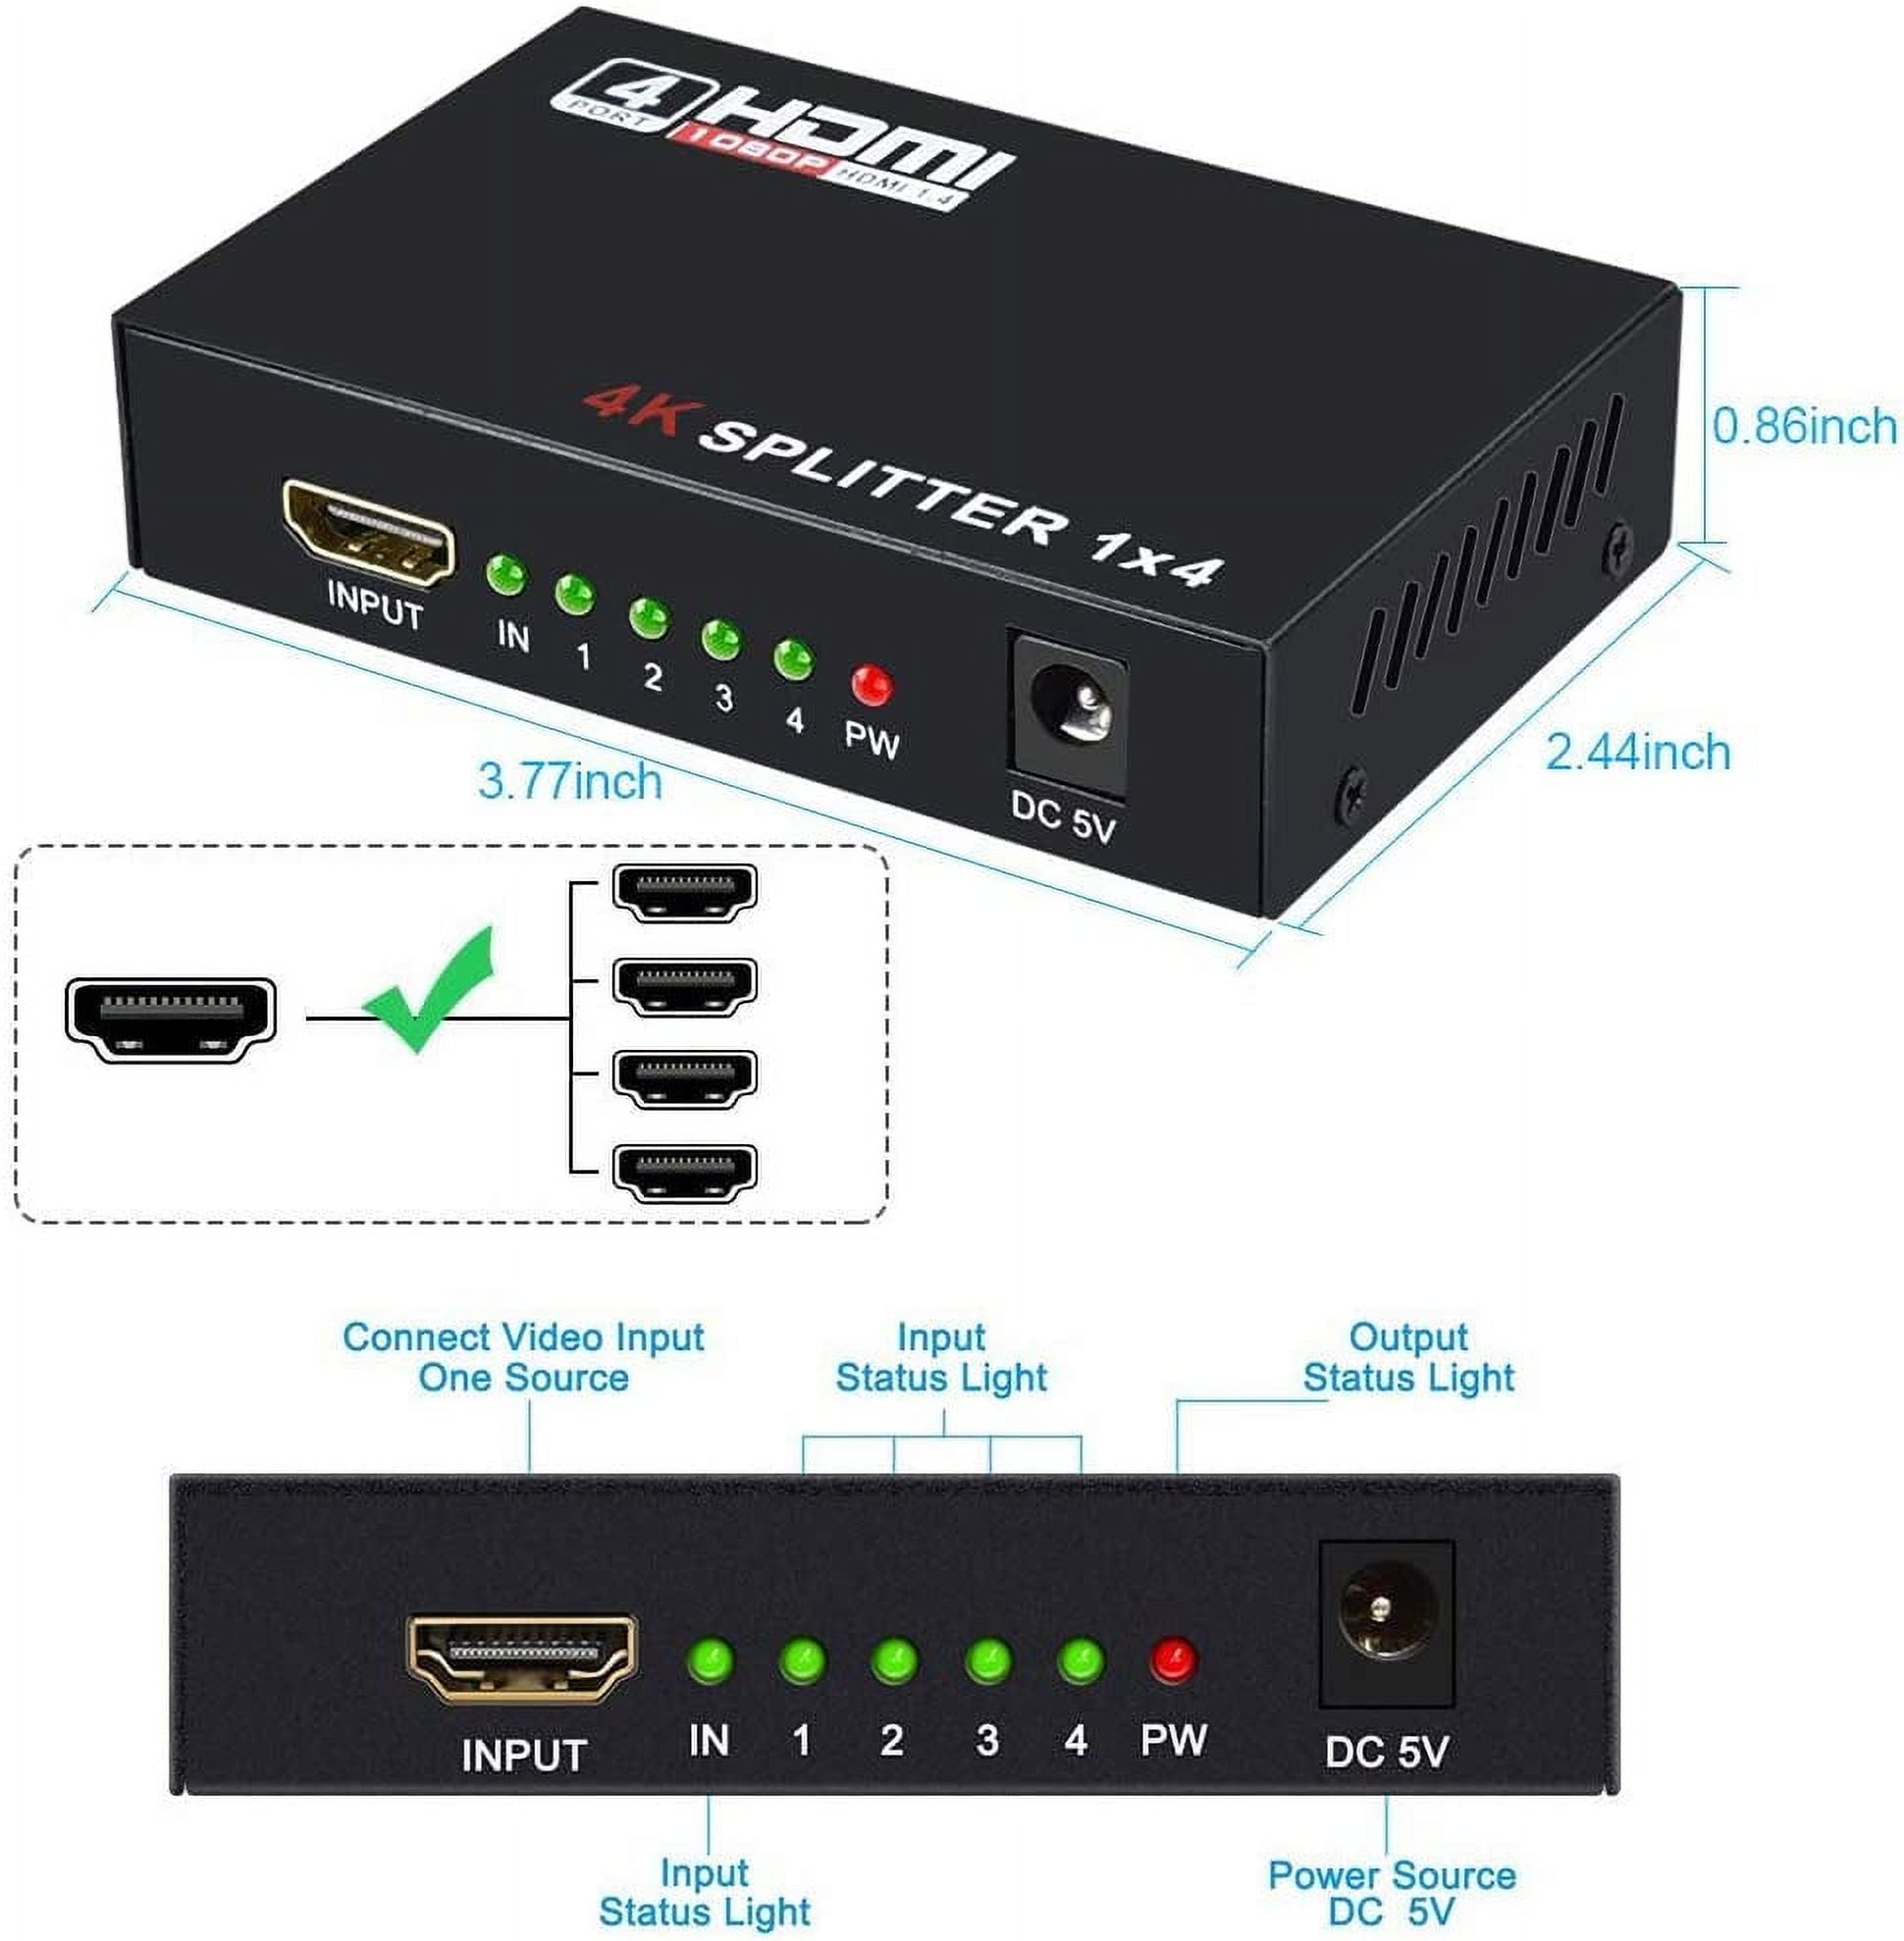 HDMI Splitter 1 in 2 Out, 4K HDMI Splitter for Dual Monitors  Duplicate，Support1080P/4k30/60 /3D，PC,PS4,X-Box, Blu-Ray, 